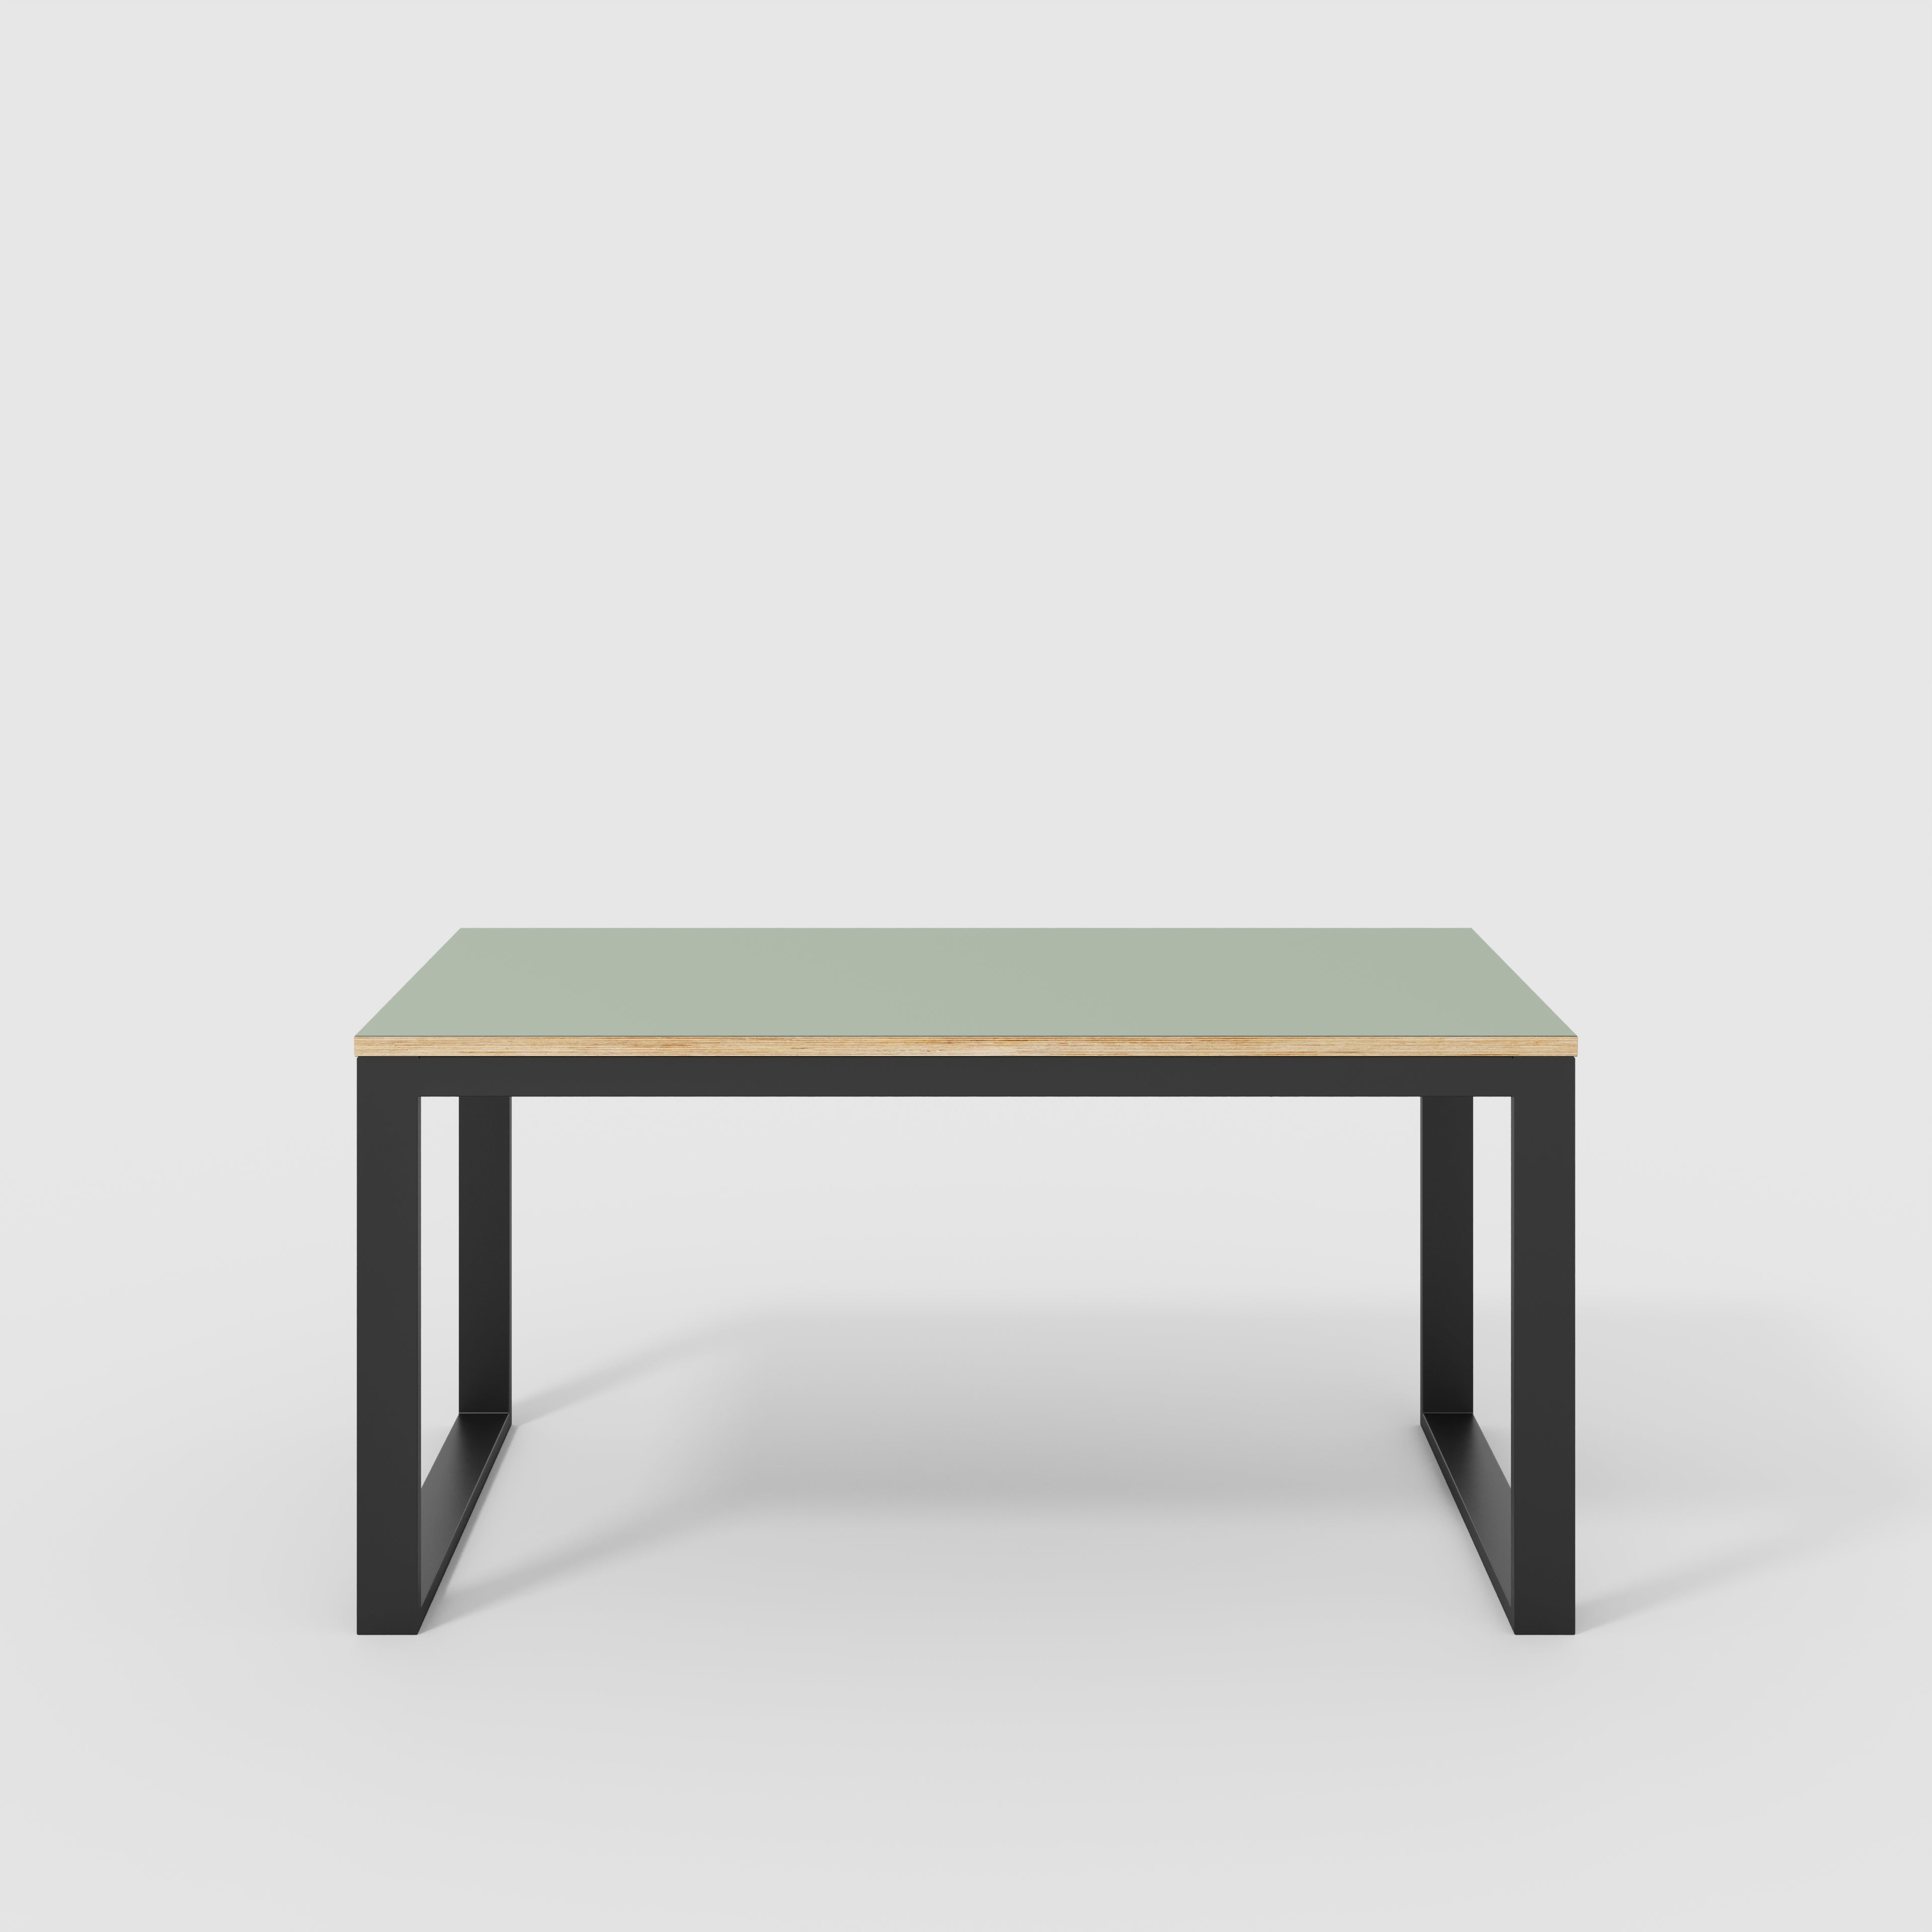 Table with Black Industrial Frame - Formica Green Slate - 1500(w) x 745(d) x 735(h)